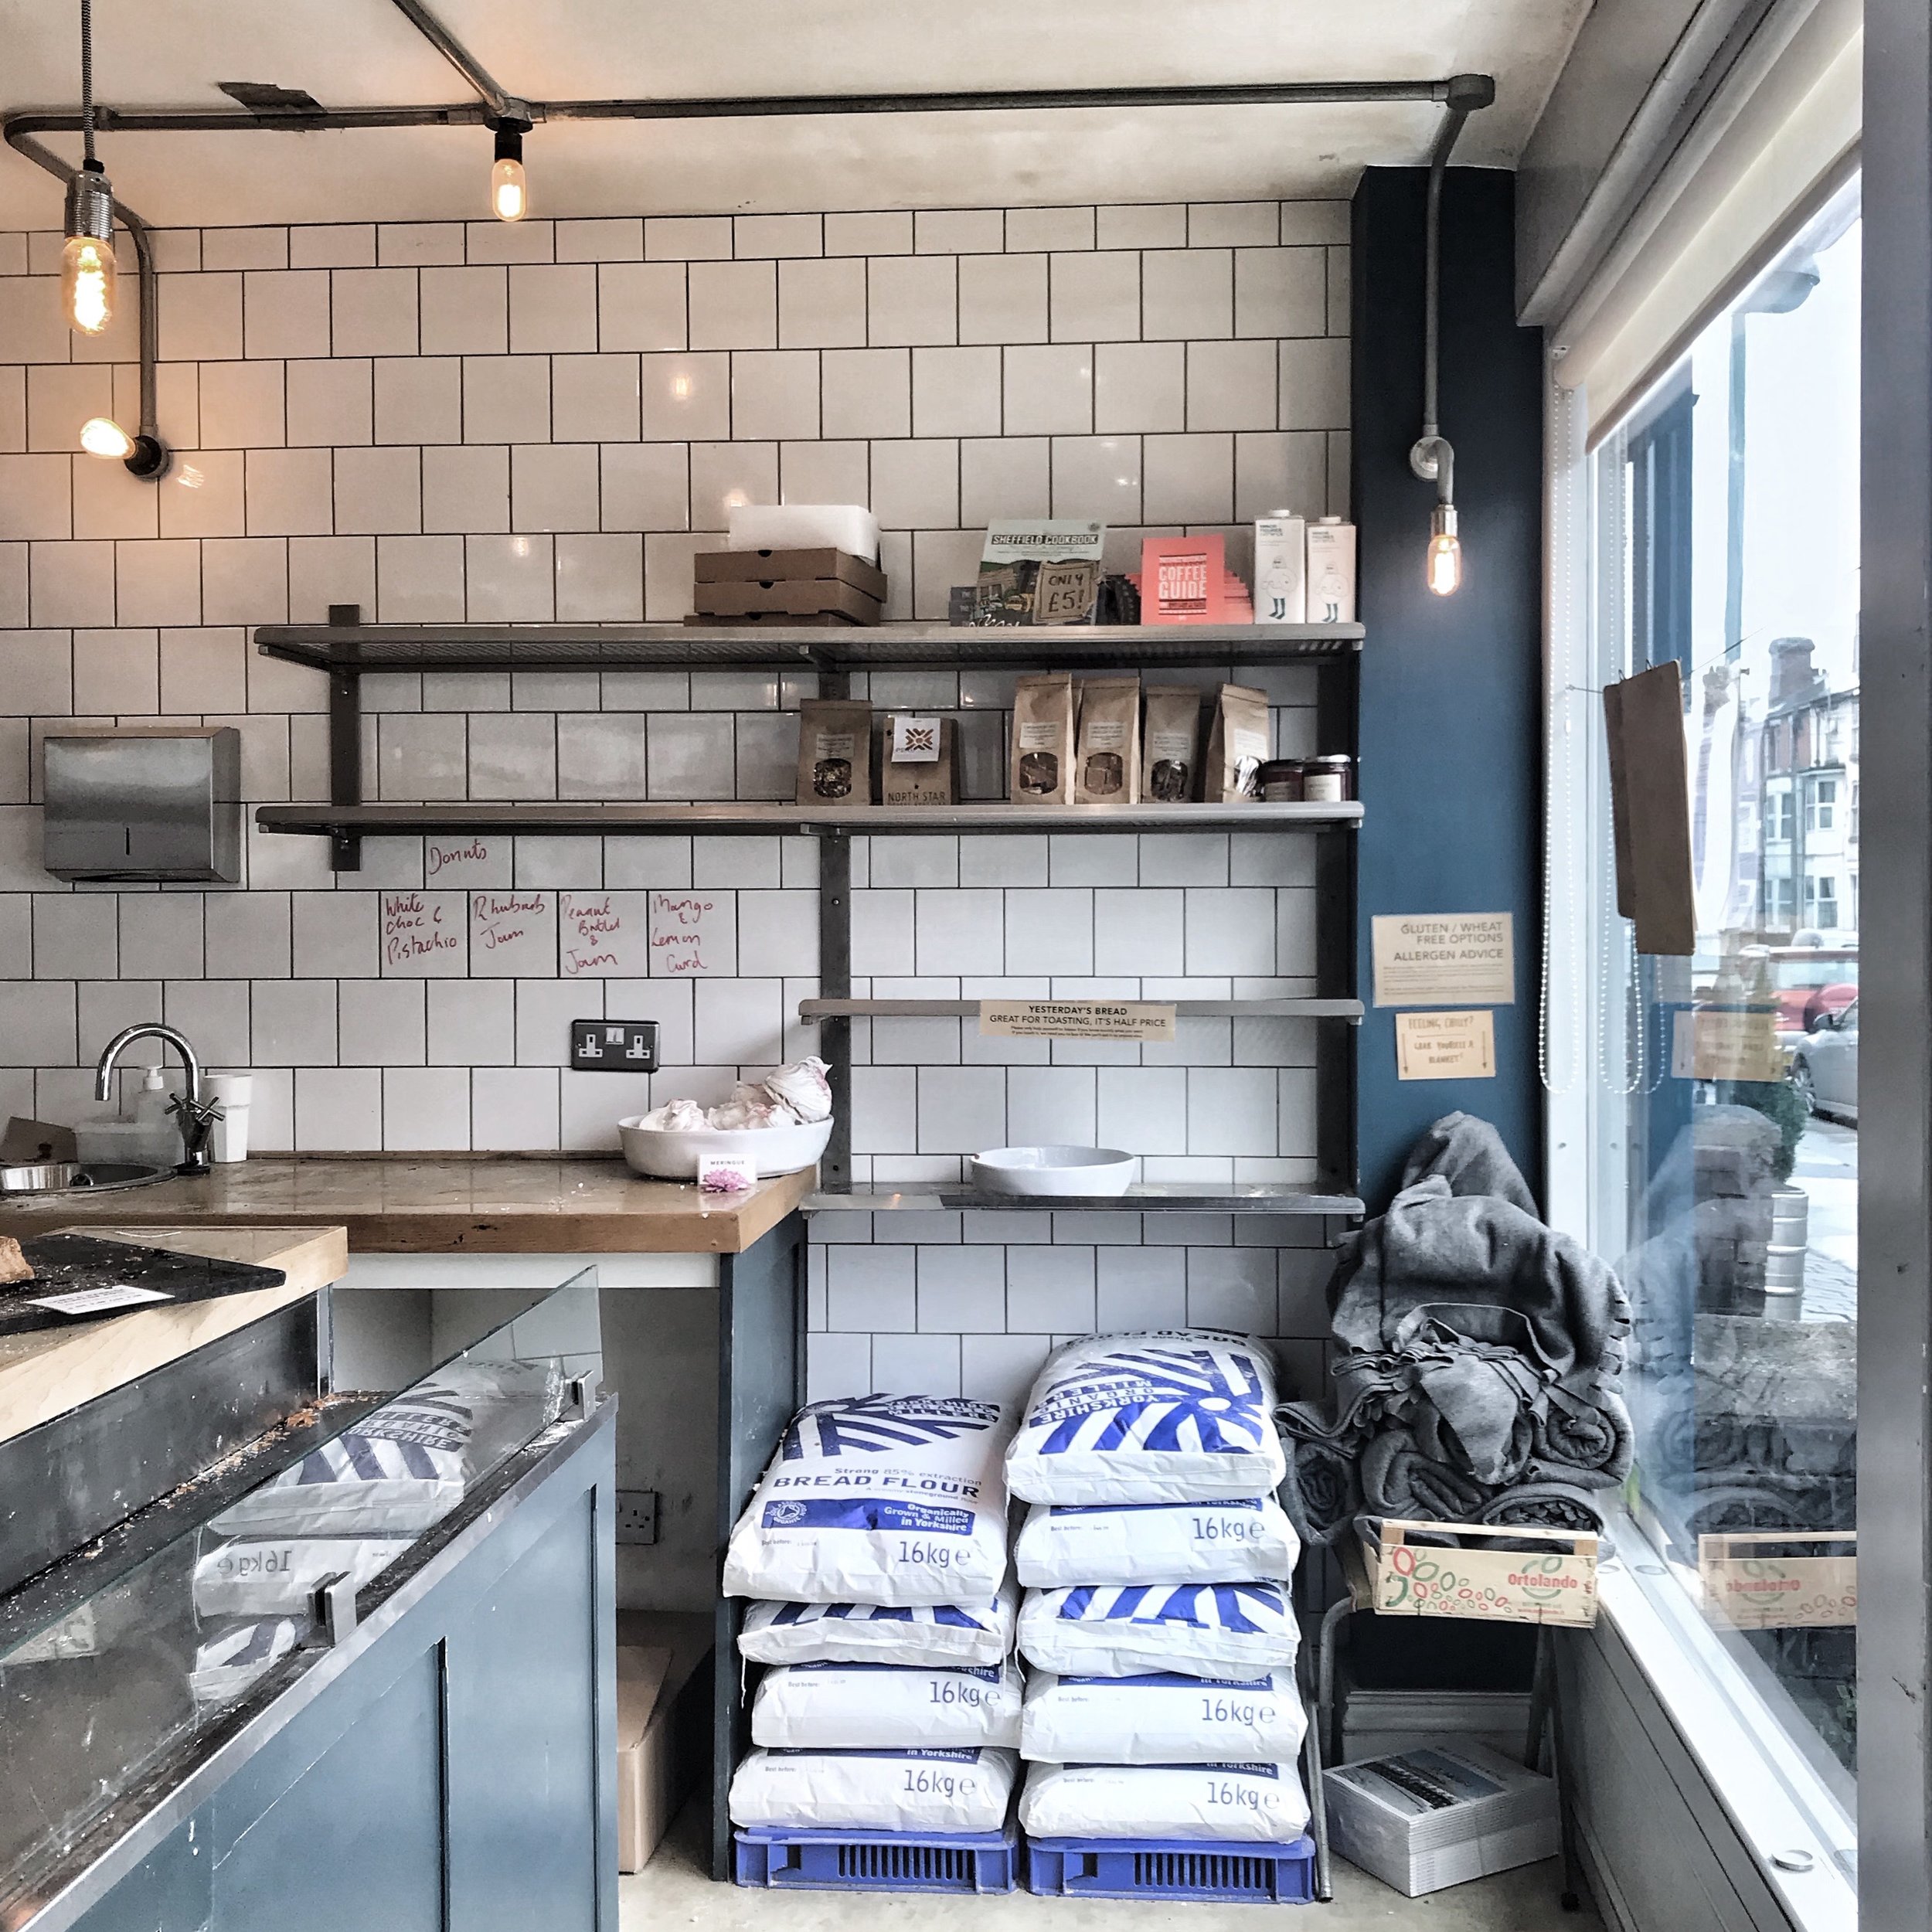 Forge bakehouse, Sheffield - Instagrammer's Guide to Sheffield by 91 Magazine